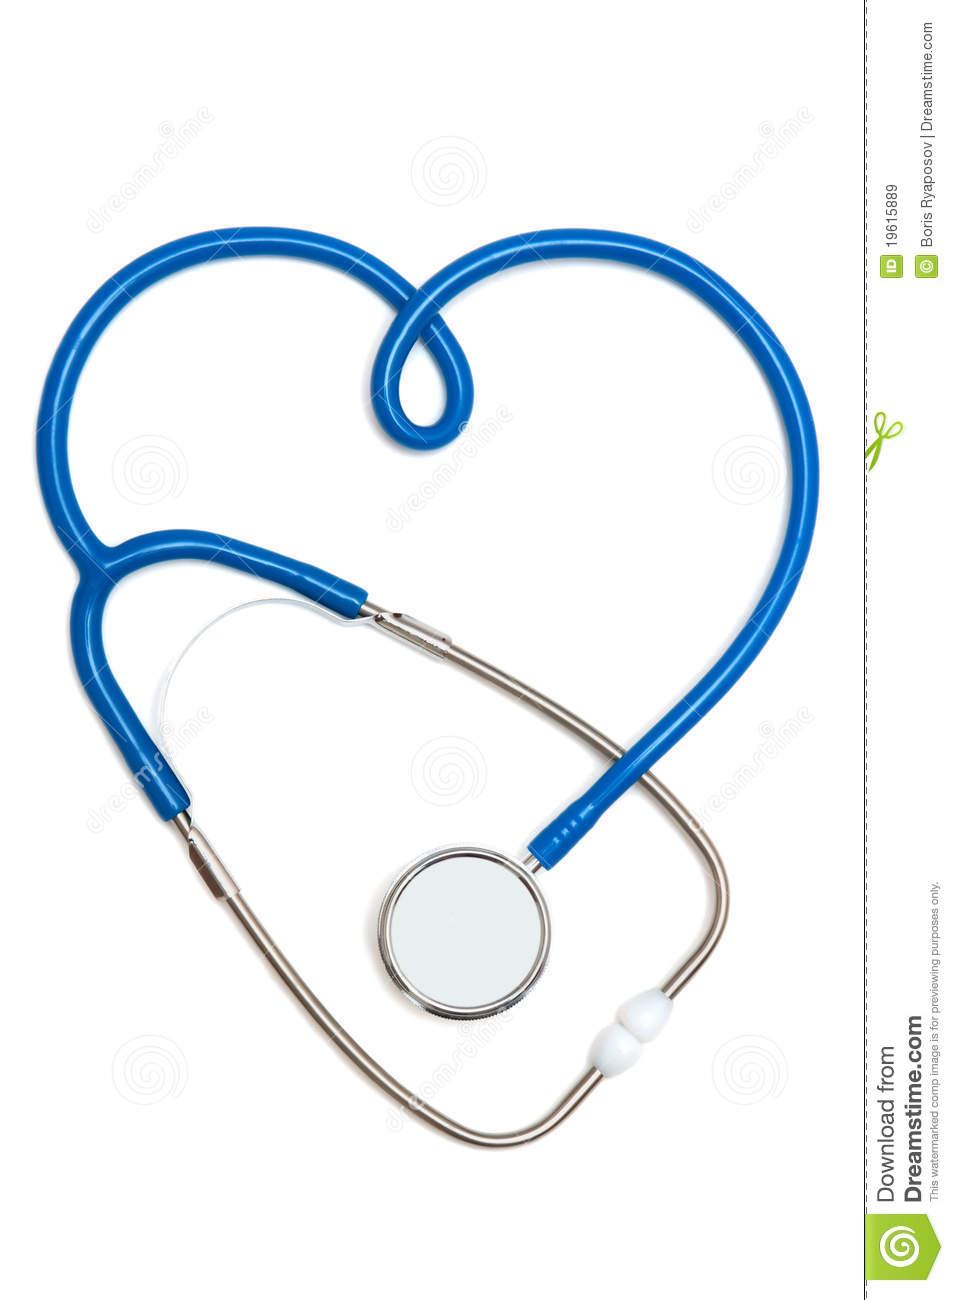 Stethoscope Heart Clipart Stethoscope In The Form Of